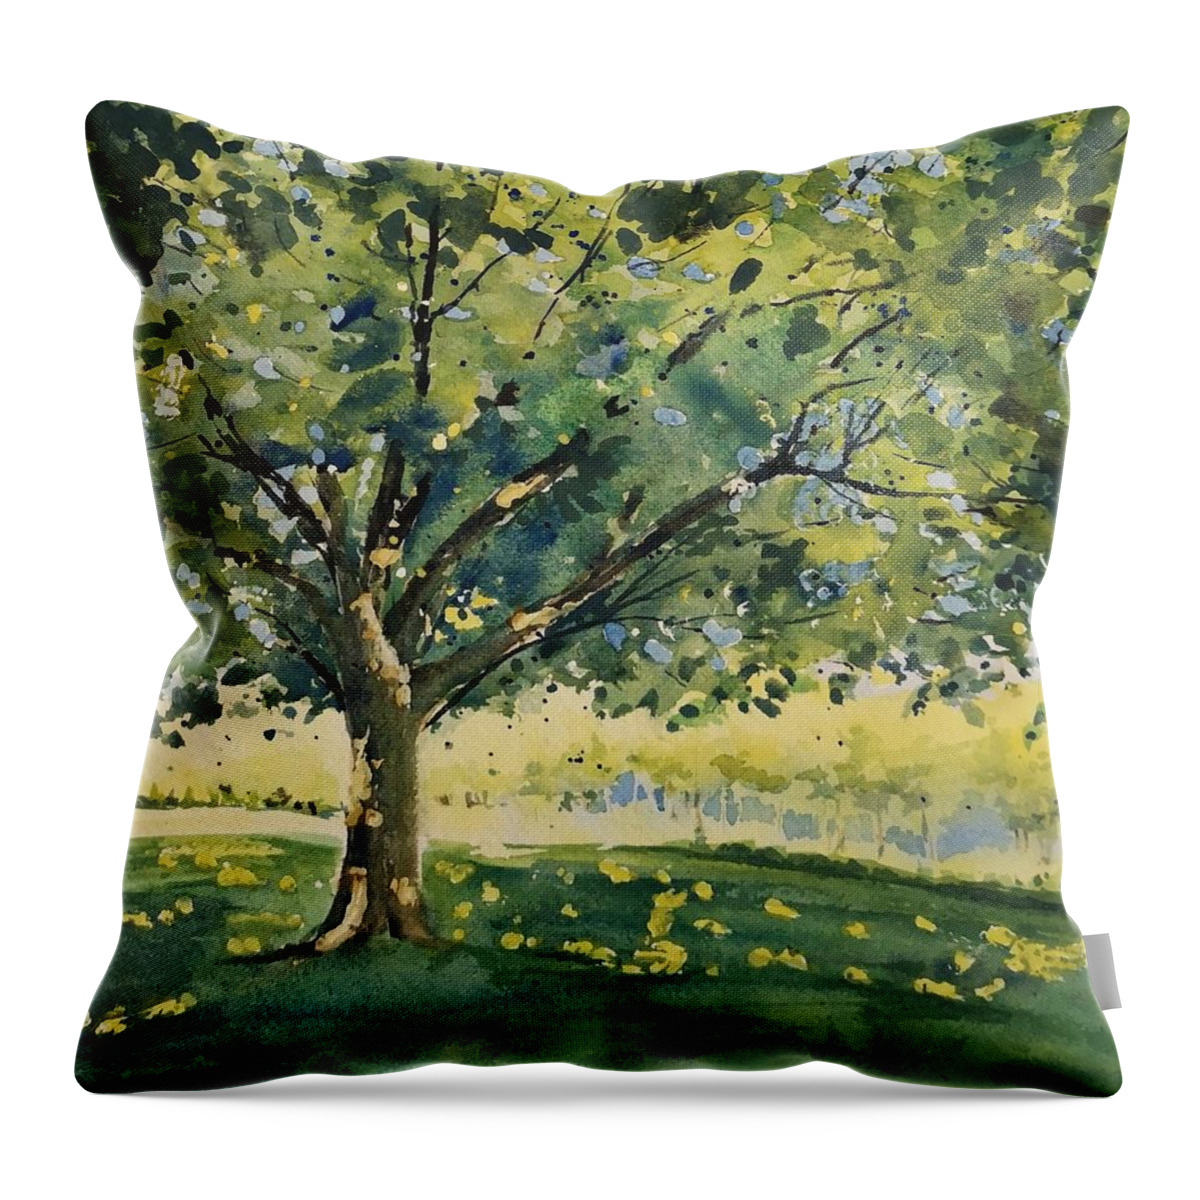 Landscape Throw Pillow featuring the painting Shade Tree by Sheila Romard